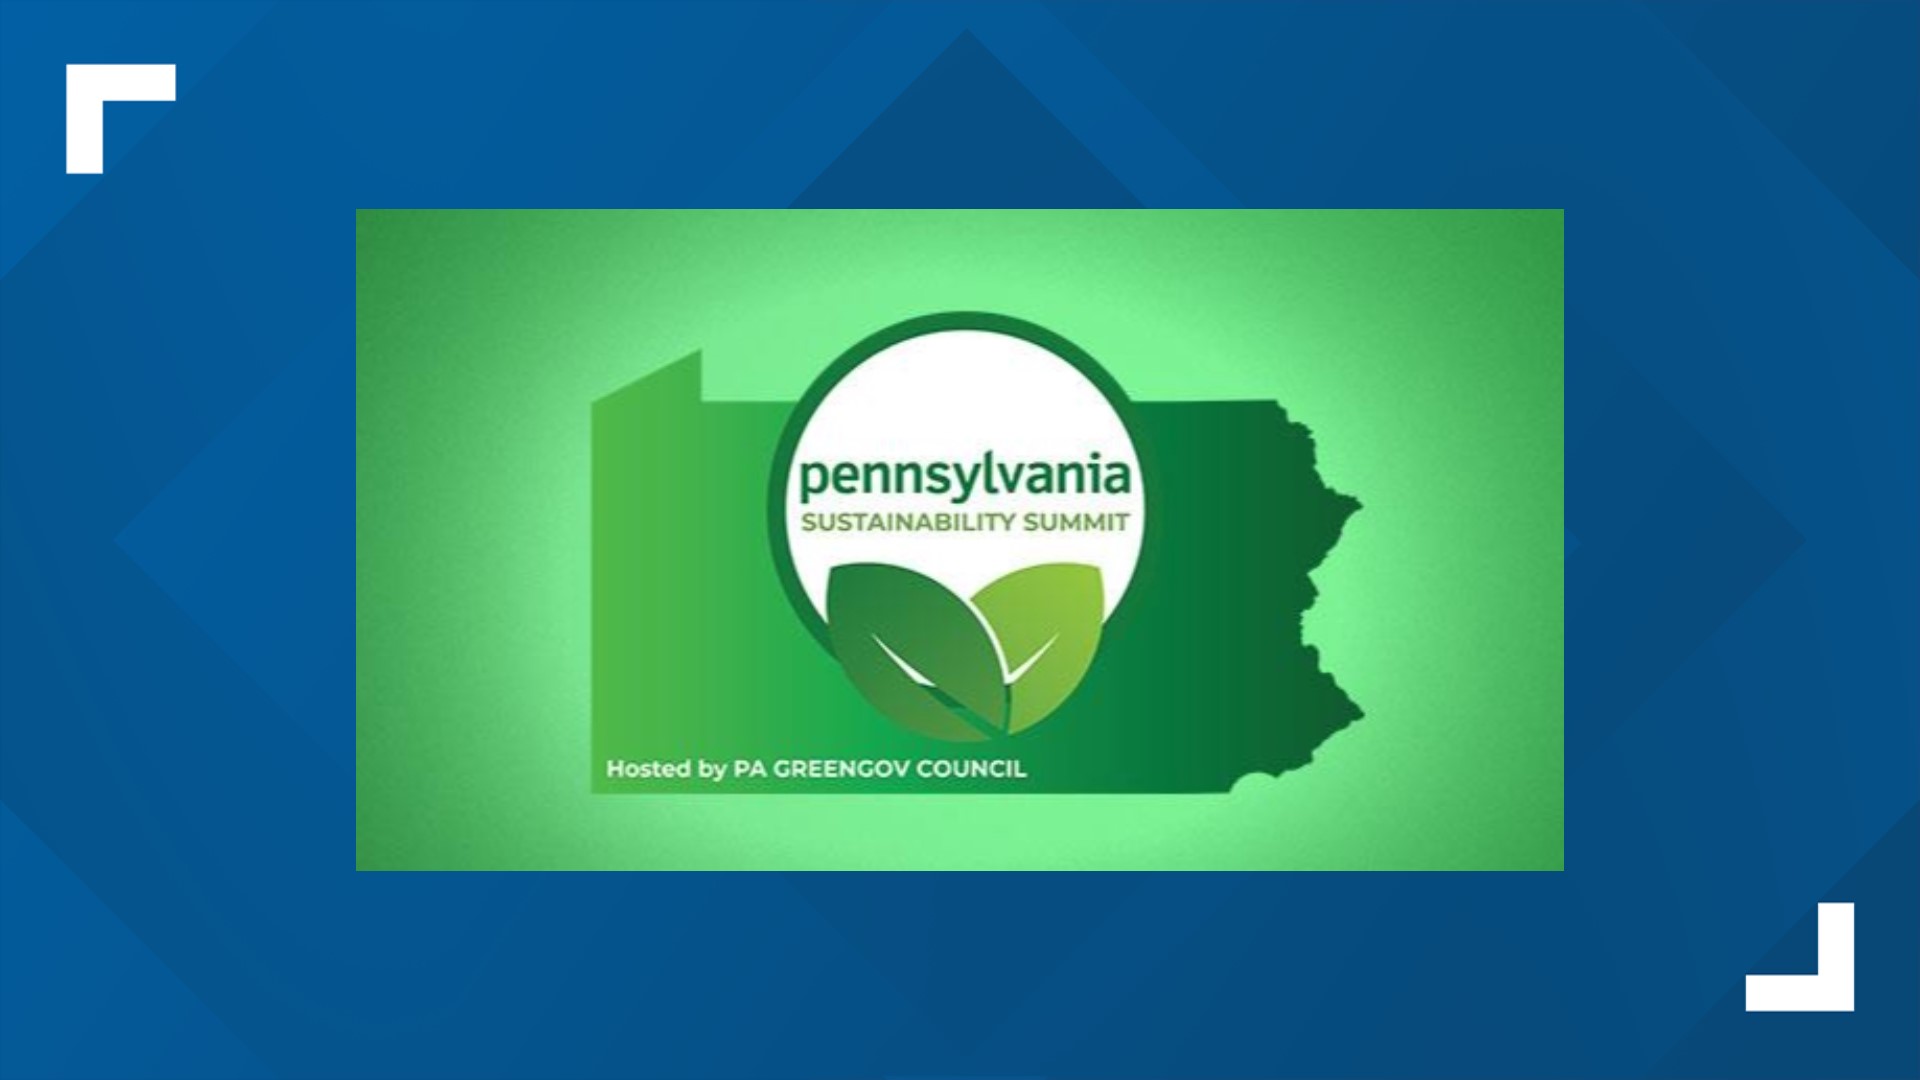 Pennsylvania's first Sustainability Summit will begin this Monday to celebrate Sustainability Week in the Commonwealth.